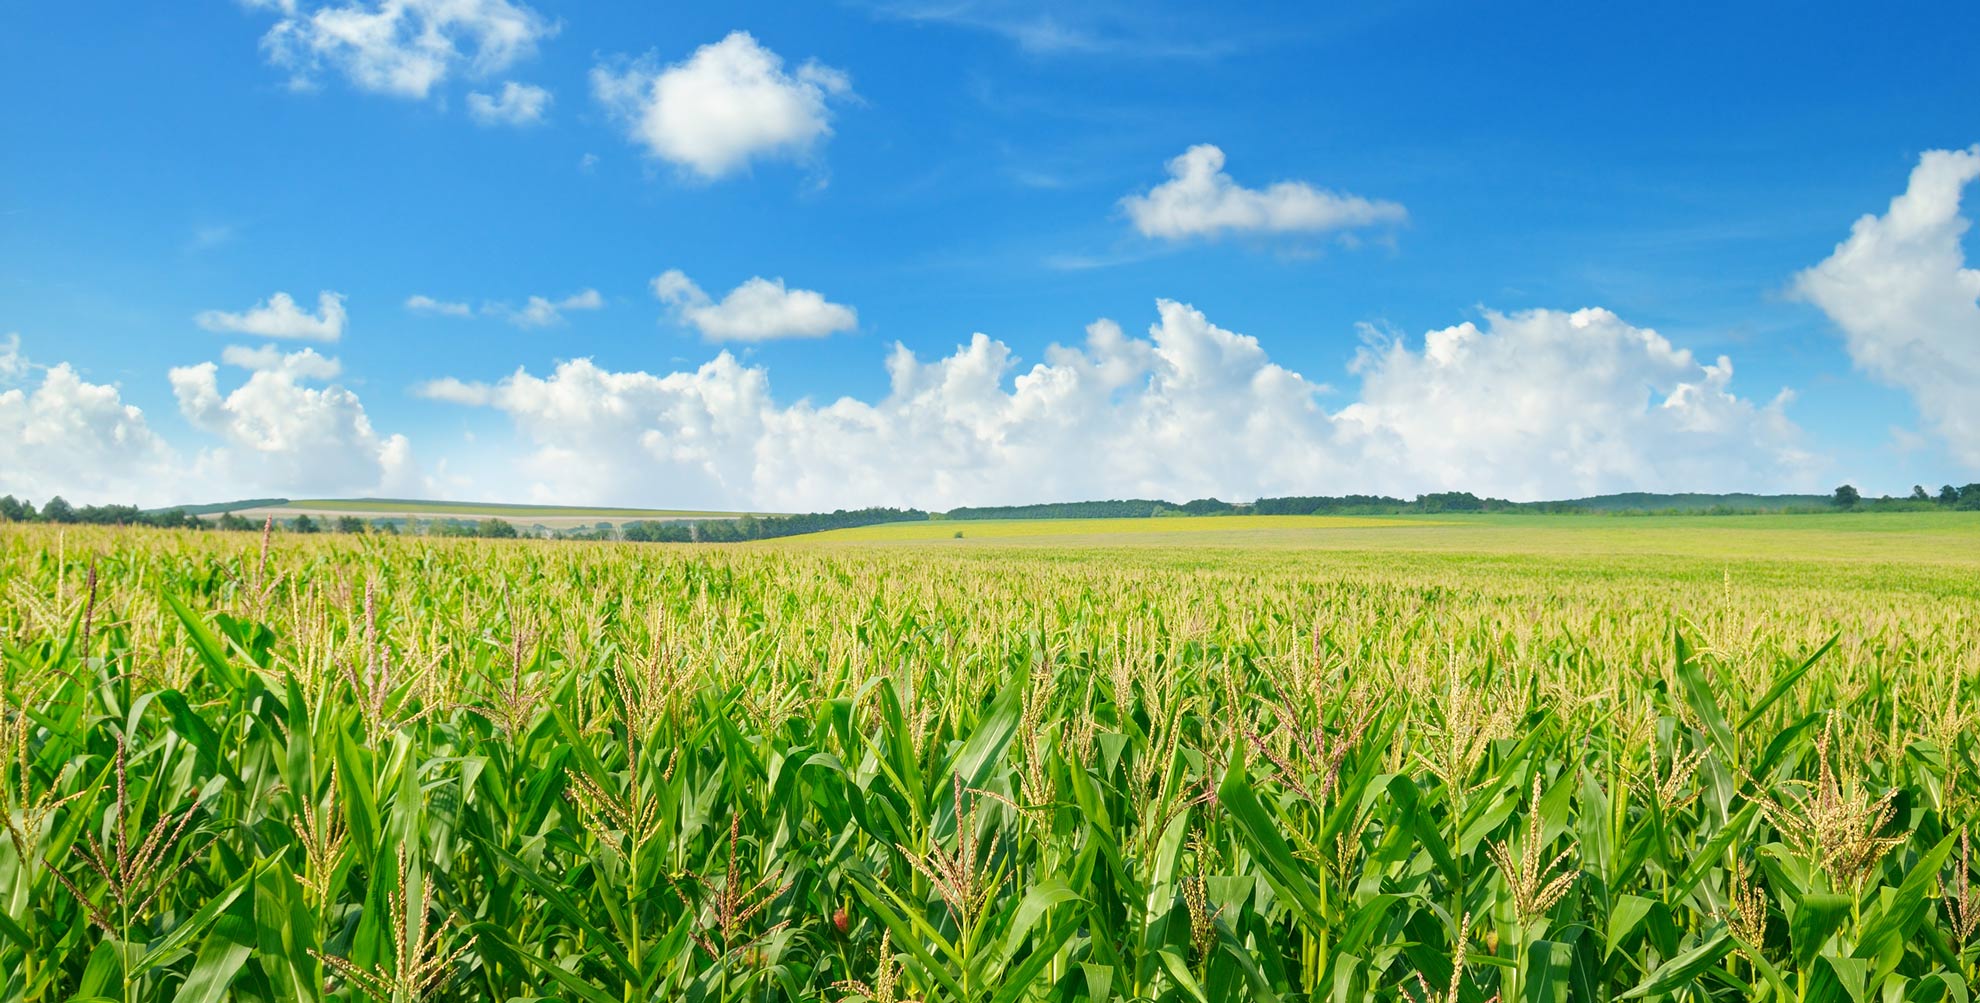 A cornfield under a blue sky with fluffy clouds.